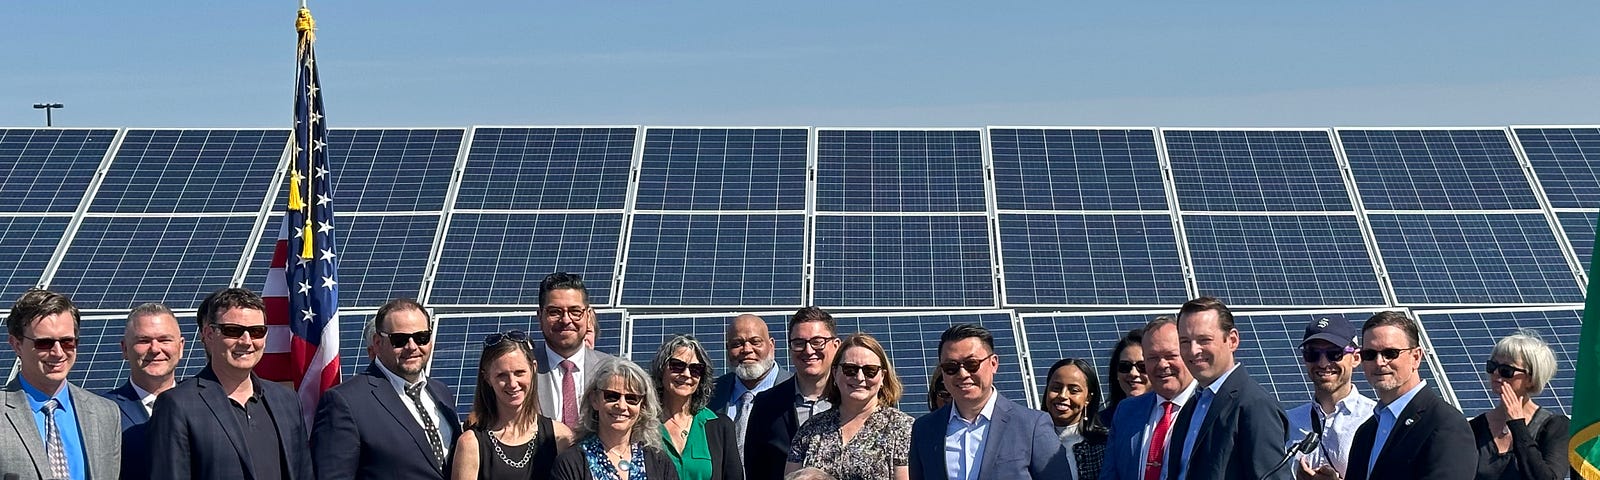 Photo of Gov. Inslee seated at a table signing a bill and a crowd of a couple dozen people standing behind him, smiling at the camera. Behind them are a large array of solar panels and bright blue sky.